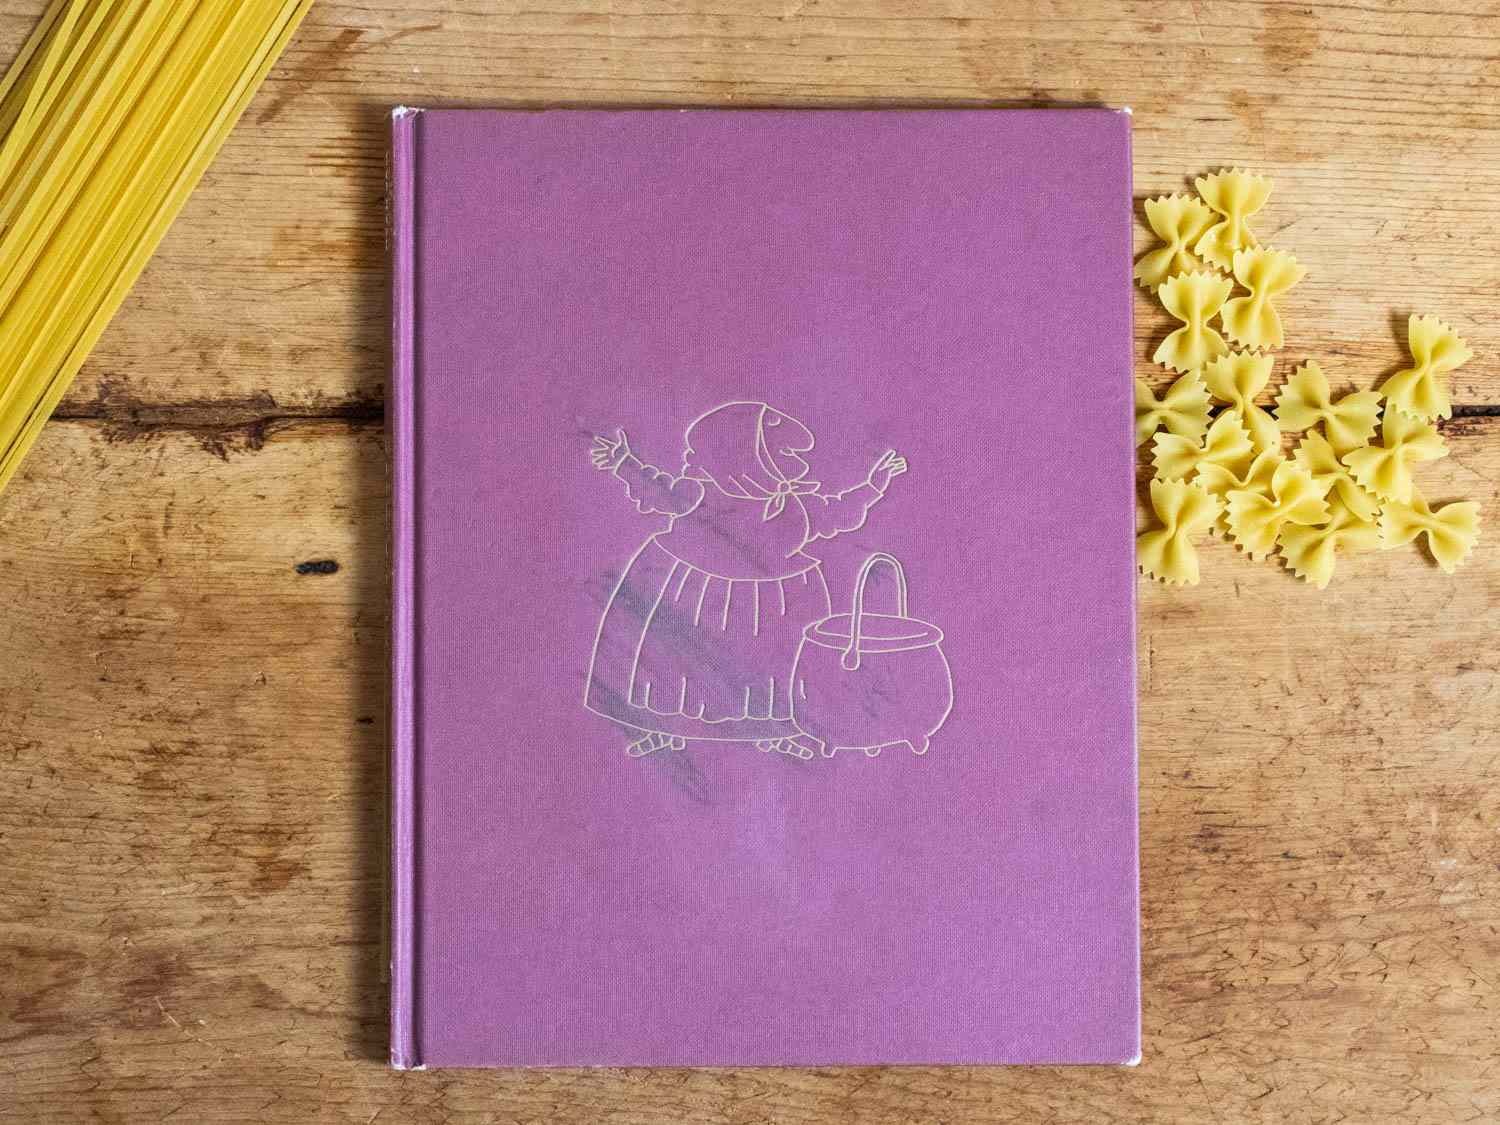 A copy of the book Strega Nona by Tomie dePaola, on a wood tabletop with dried pasta. .